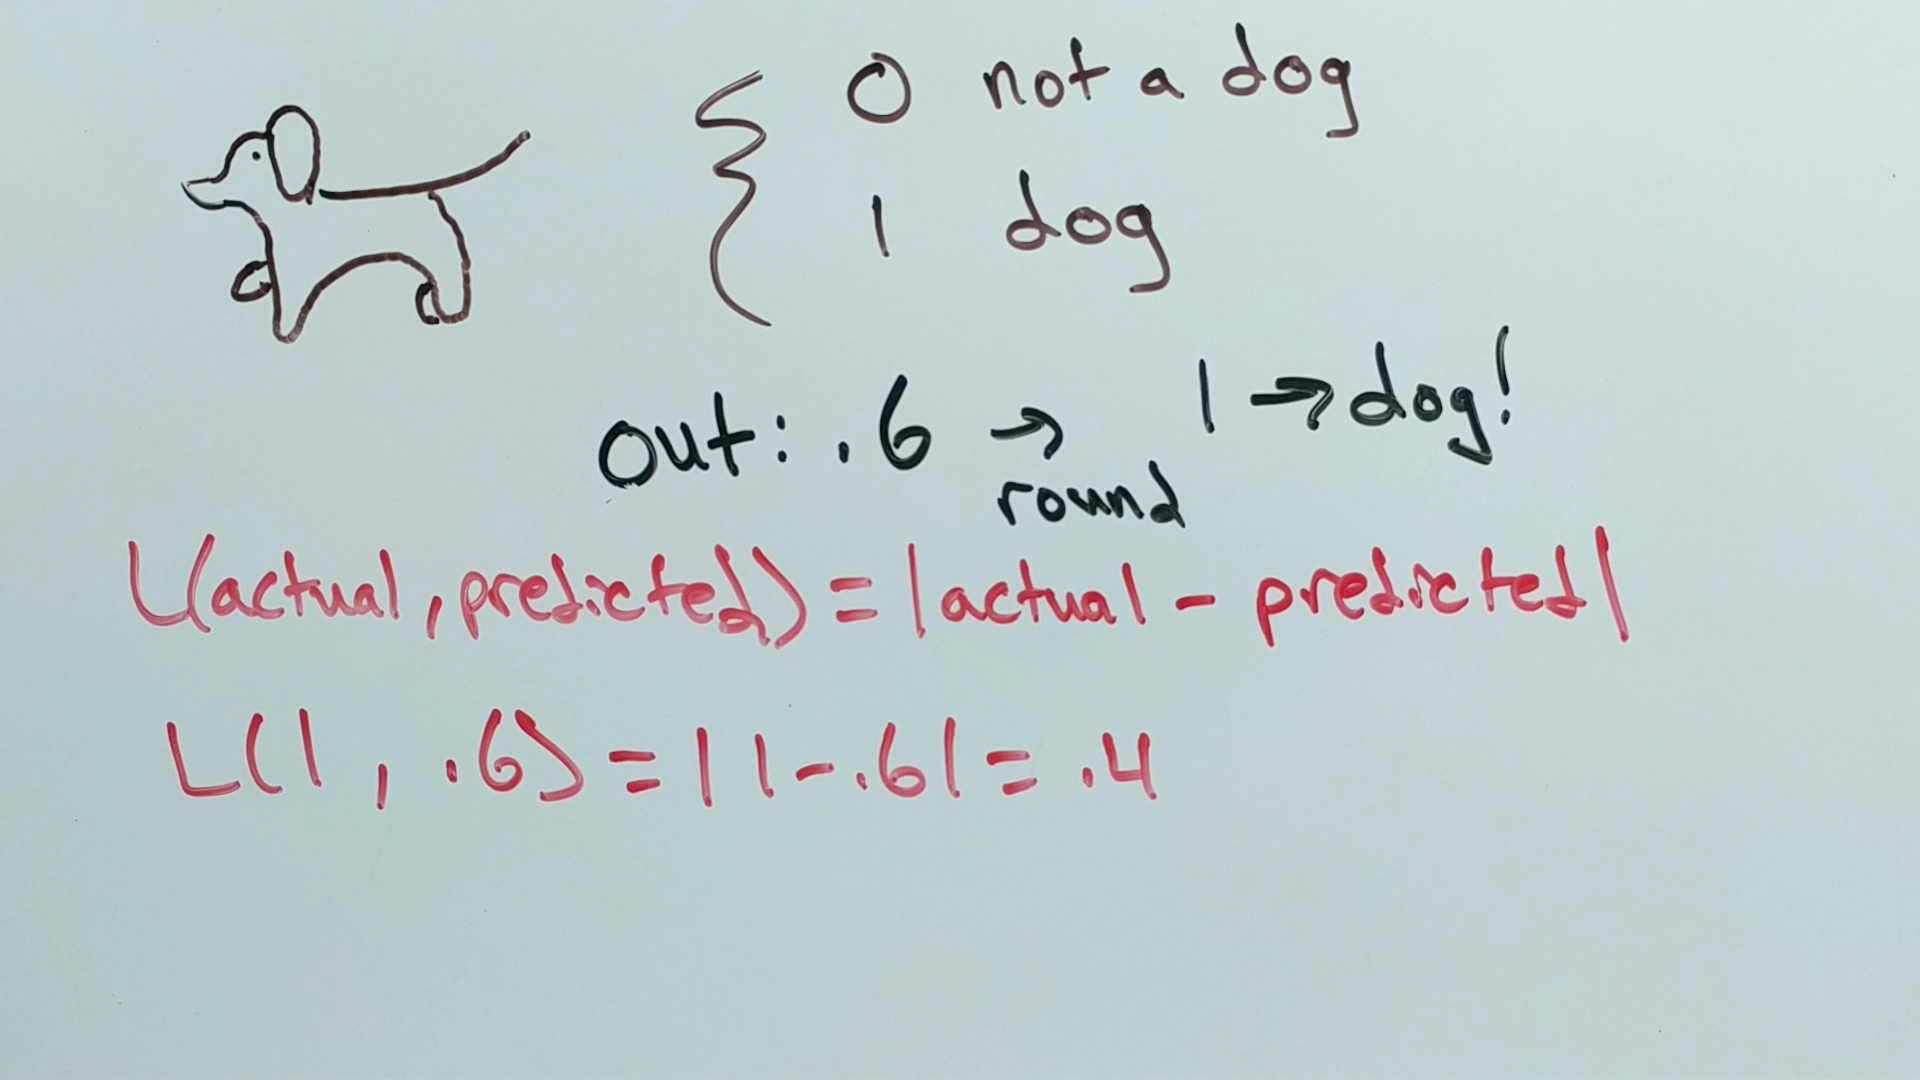 Is it a dog + loss function